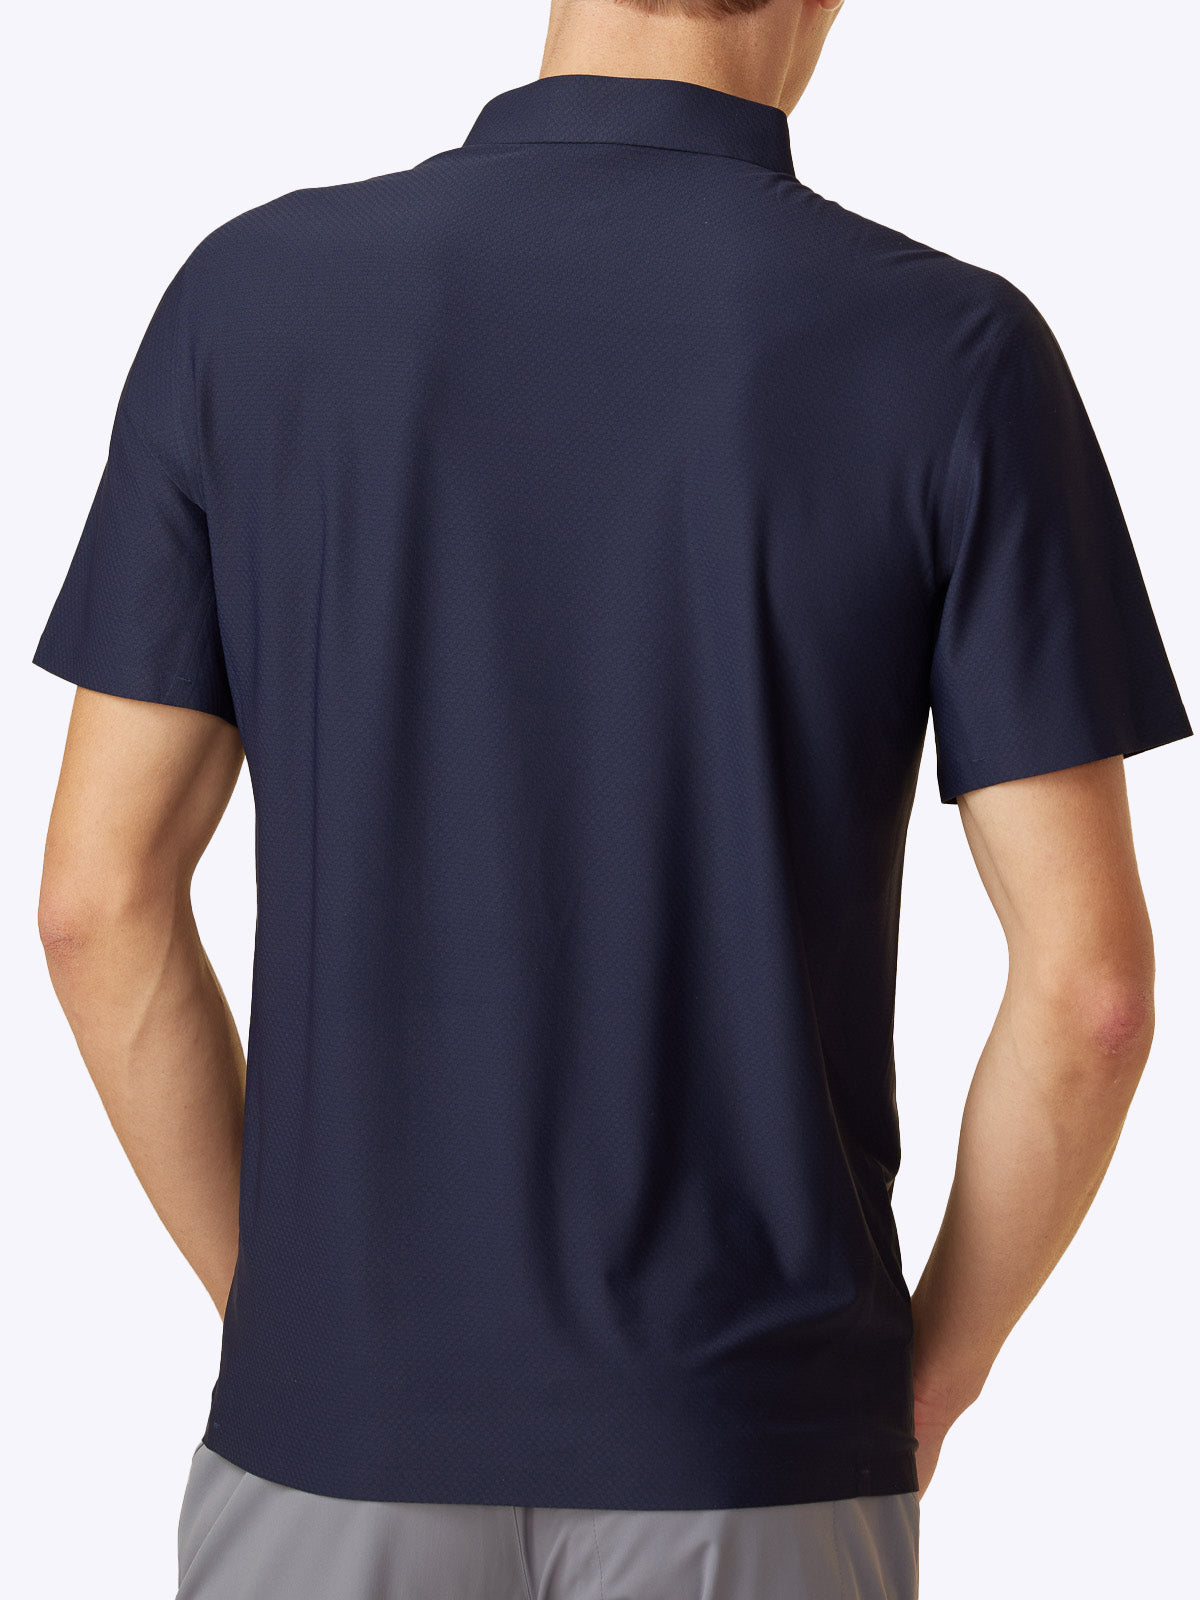 Rear view of the Loogaroo Gameday Polo in Oceana, illustrating the shirt's elegant back design and texture||||Oceana